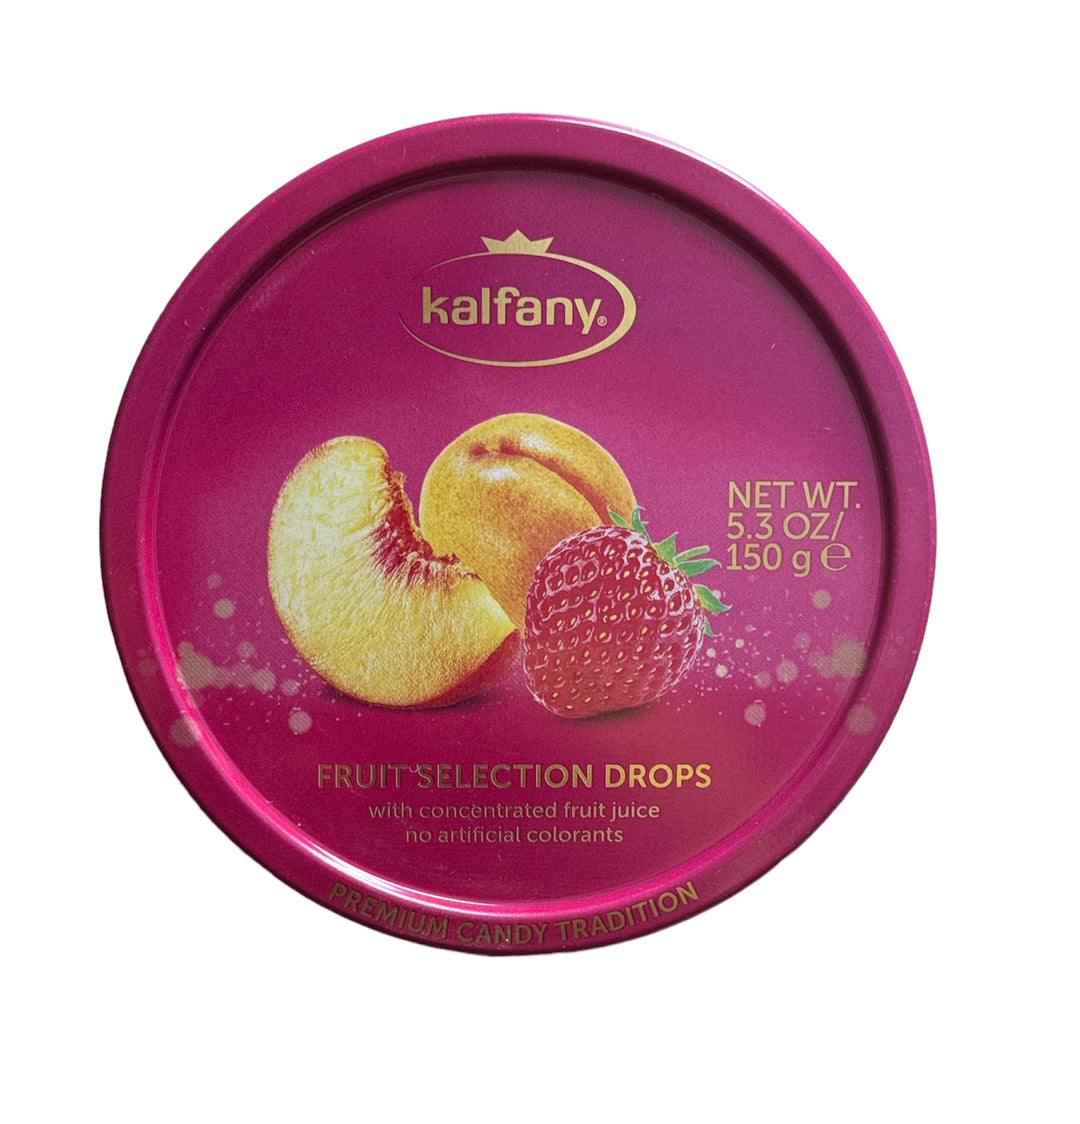 Fruit Selection drops, with concentrated fruit juice without artificial colorings. 150g